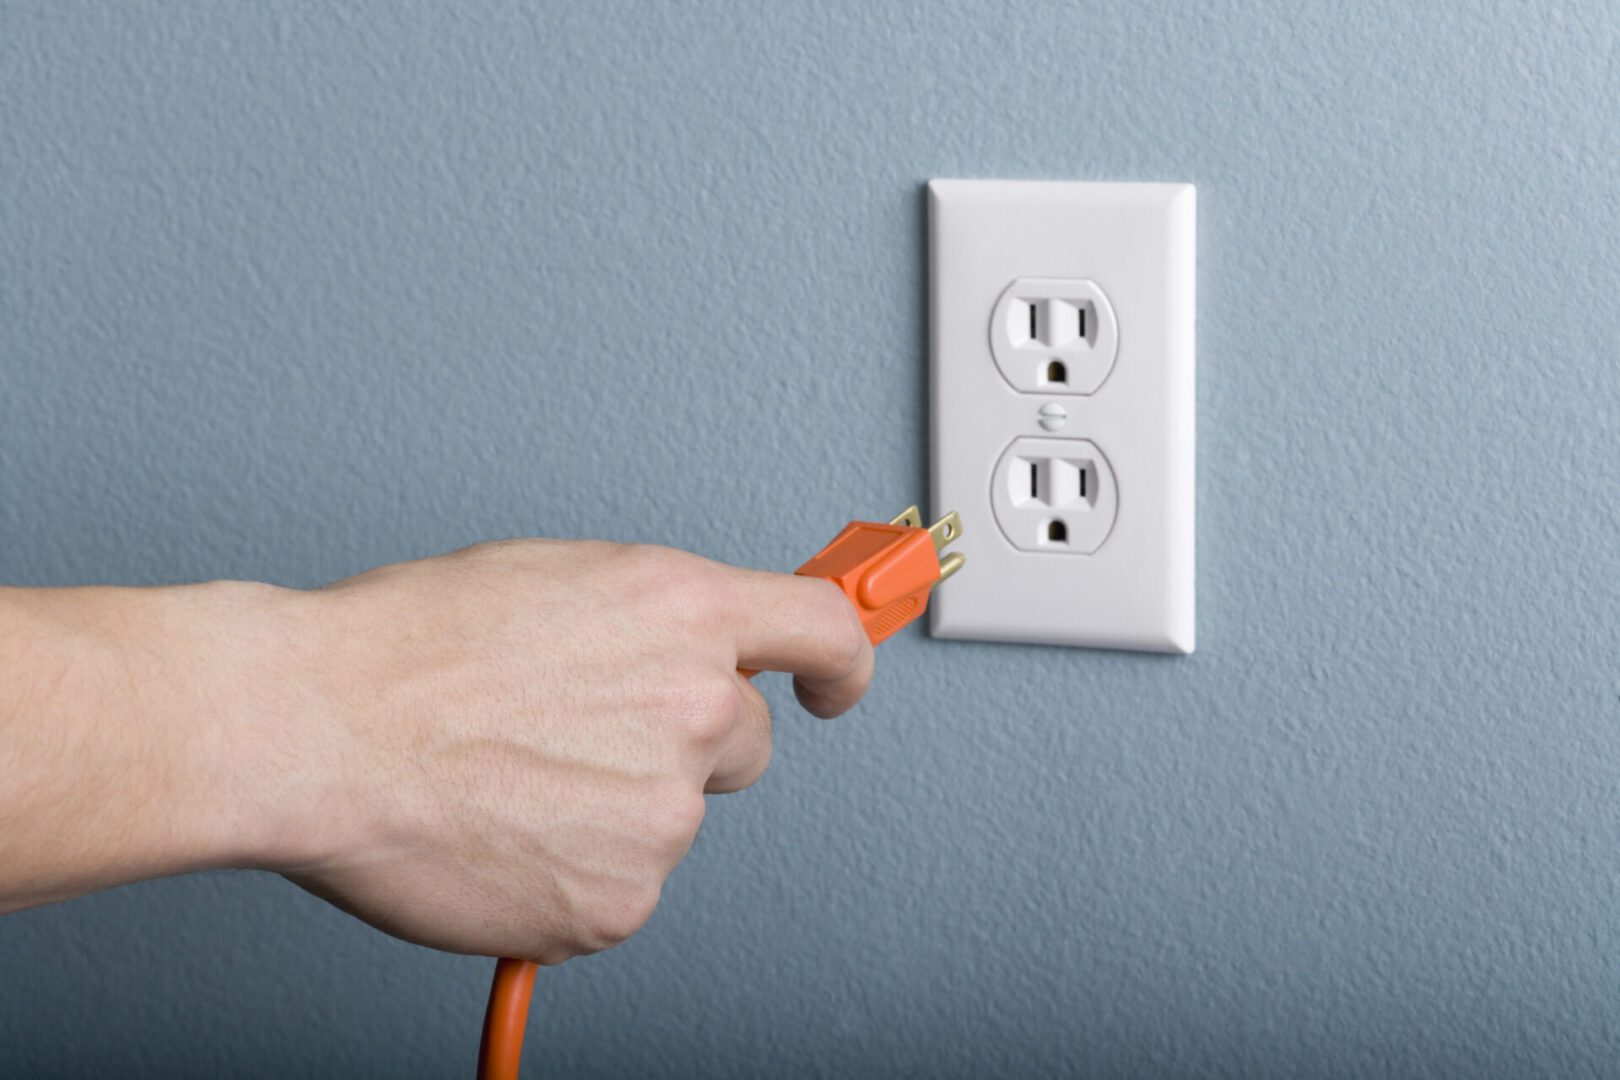 Use this extension. Розетки на зеленой стене. Electric Outlet. Plugging.